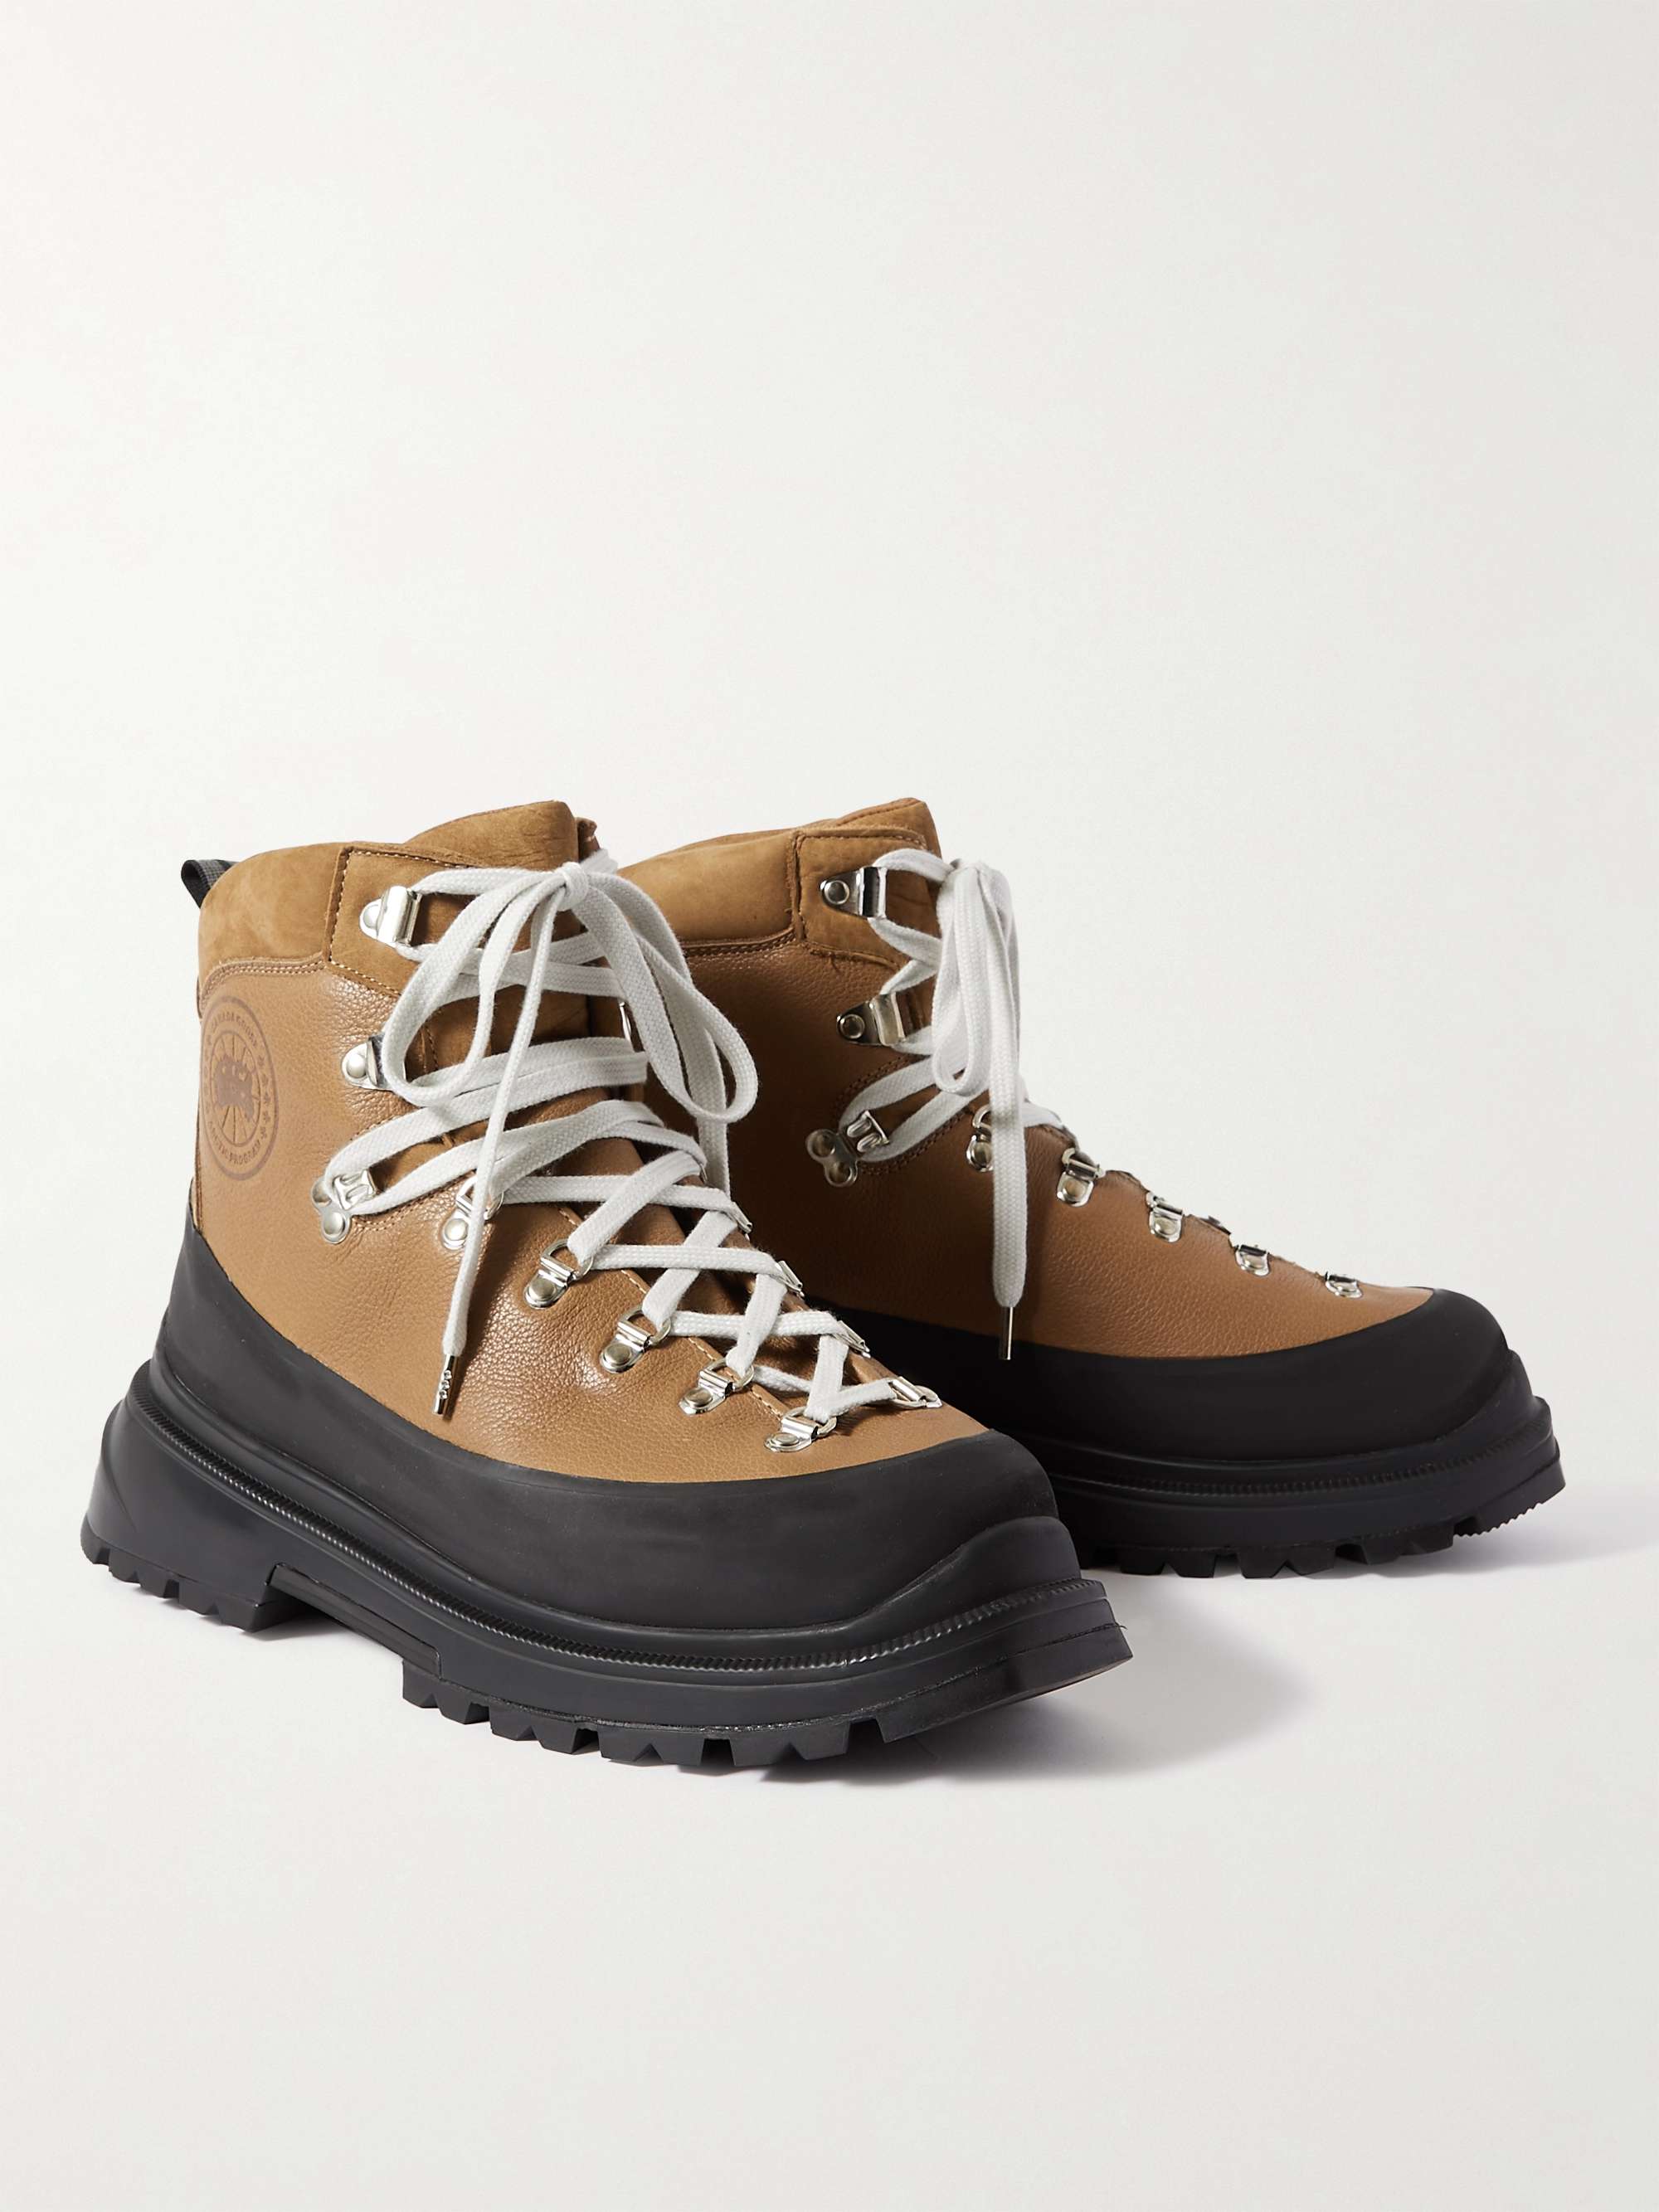 CANADA GOOSE Journey Rubber and Nubuck-Trimmed Full-Grain Leather Hiking  Boots | MR PORTER